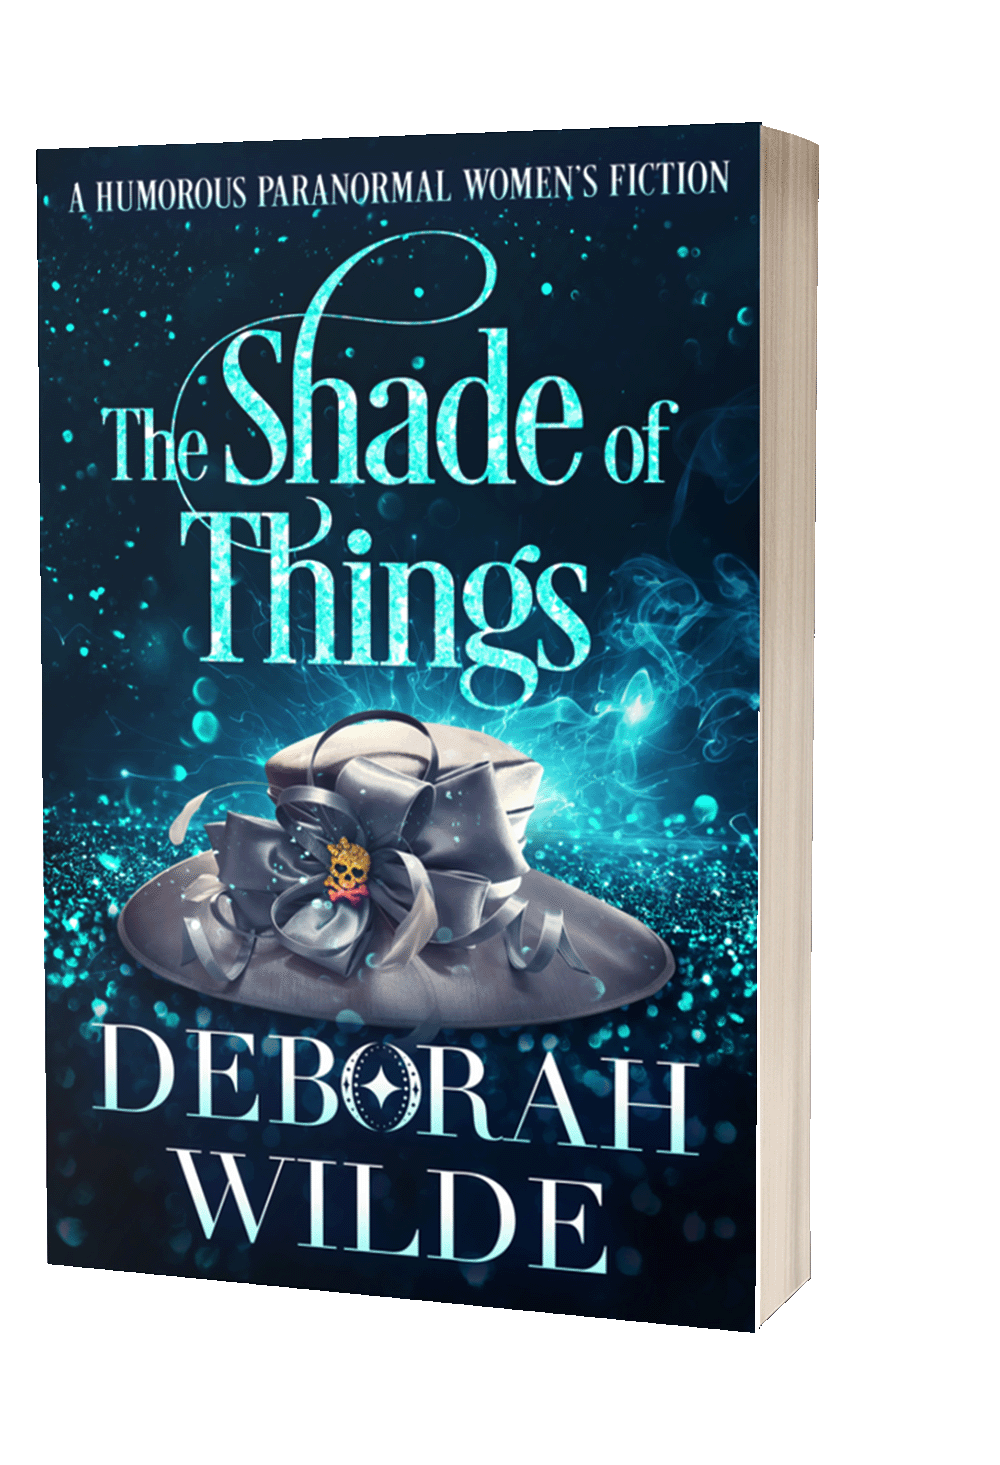 The Shade of Things, a funny, sexy, paranormal women's fiction by Deborah Wilde.